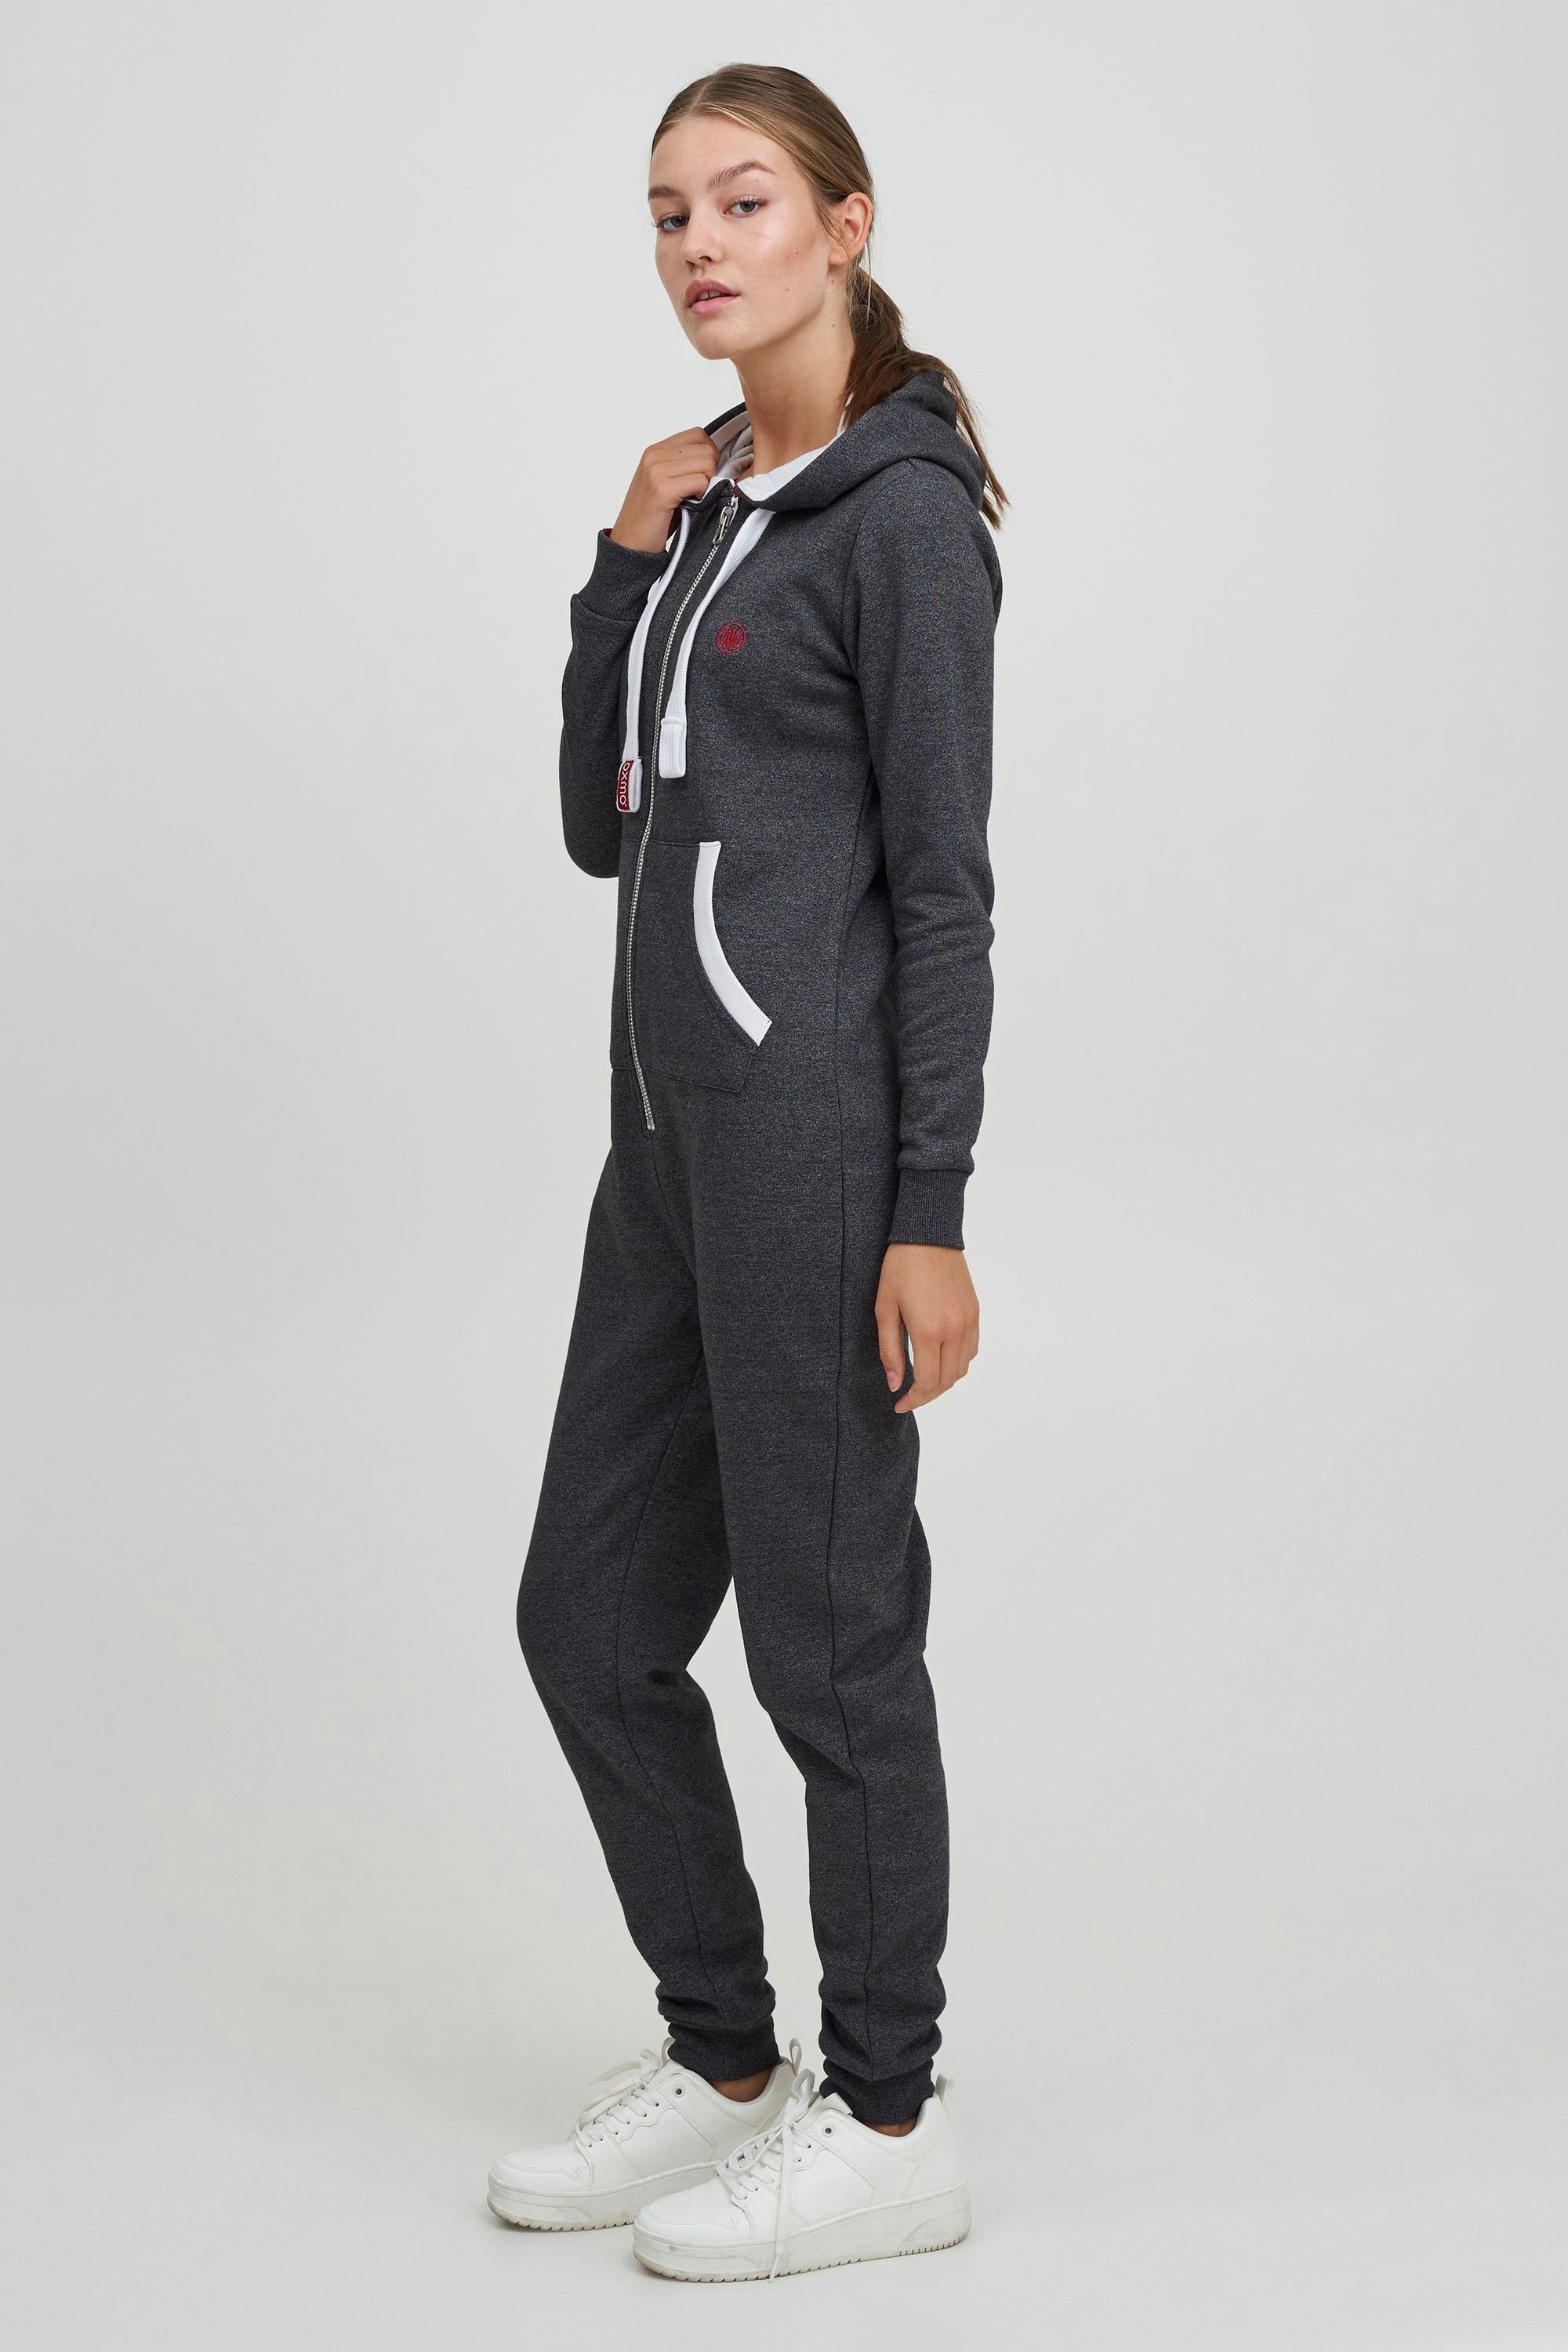 OXMO (798254) Overall MED M GREY OXBenna